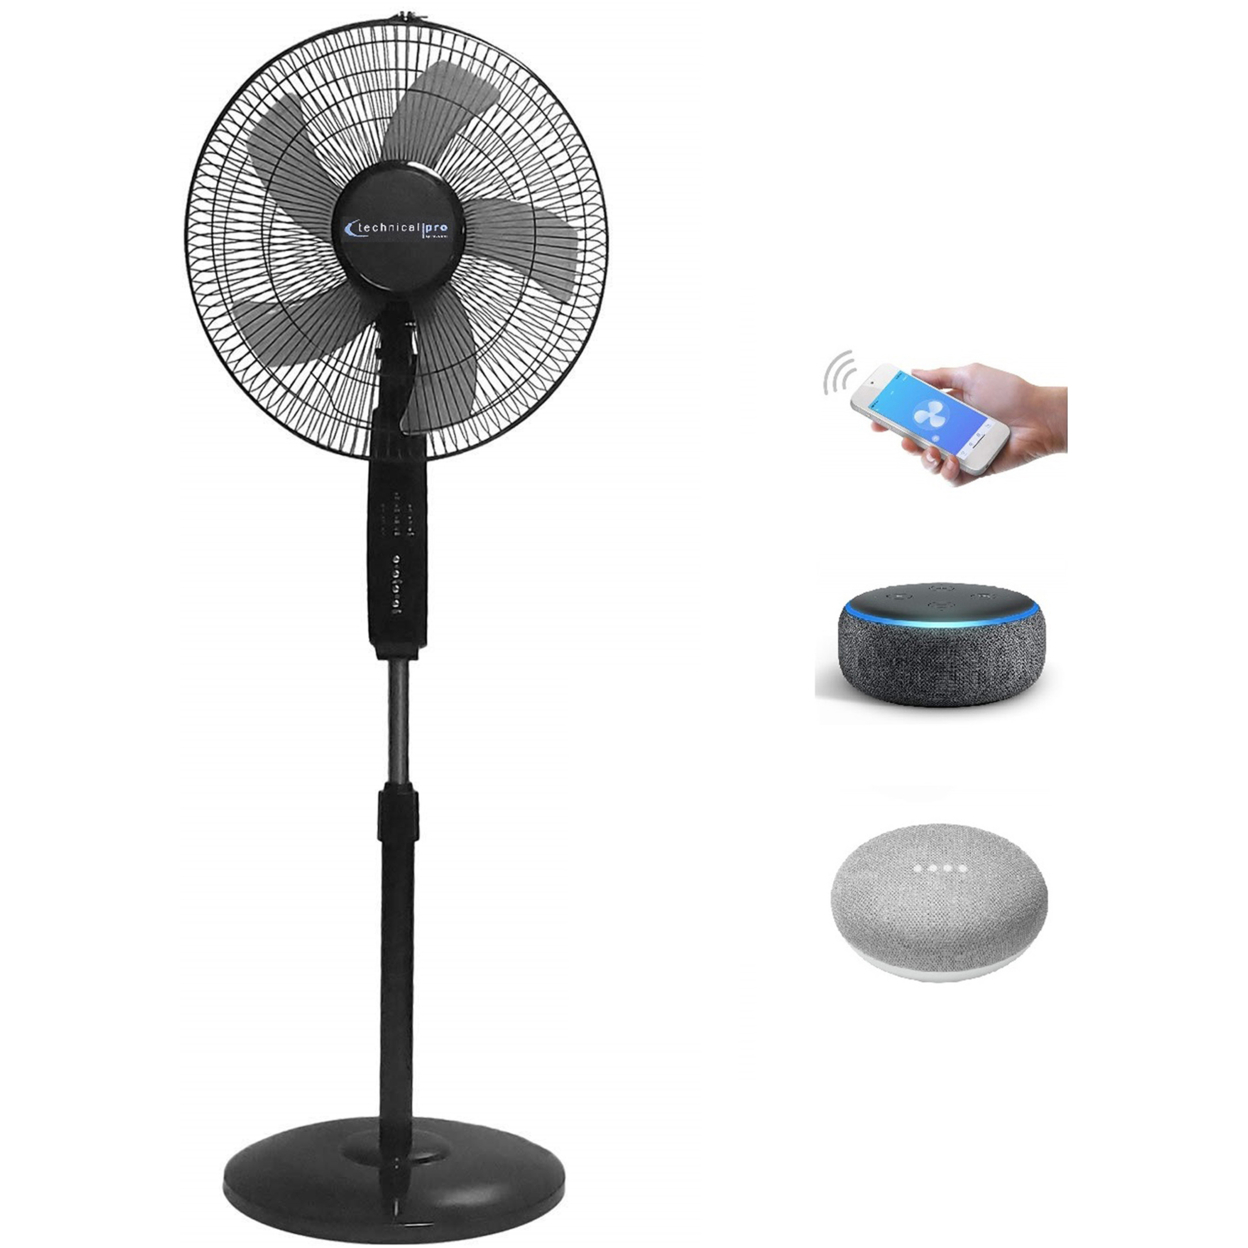 Technical Pro Smart Oscillating Pedestal Fan, 3 Speed Portable 16 Inch WIFI Enabled Standing Fan With Adjustable Height, Tilting (Black)